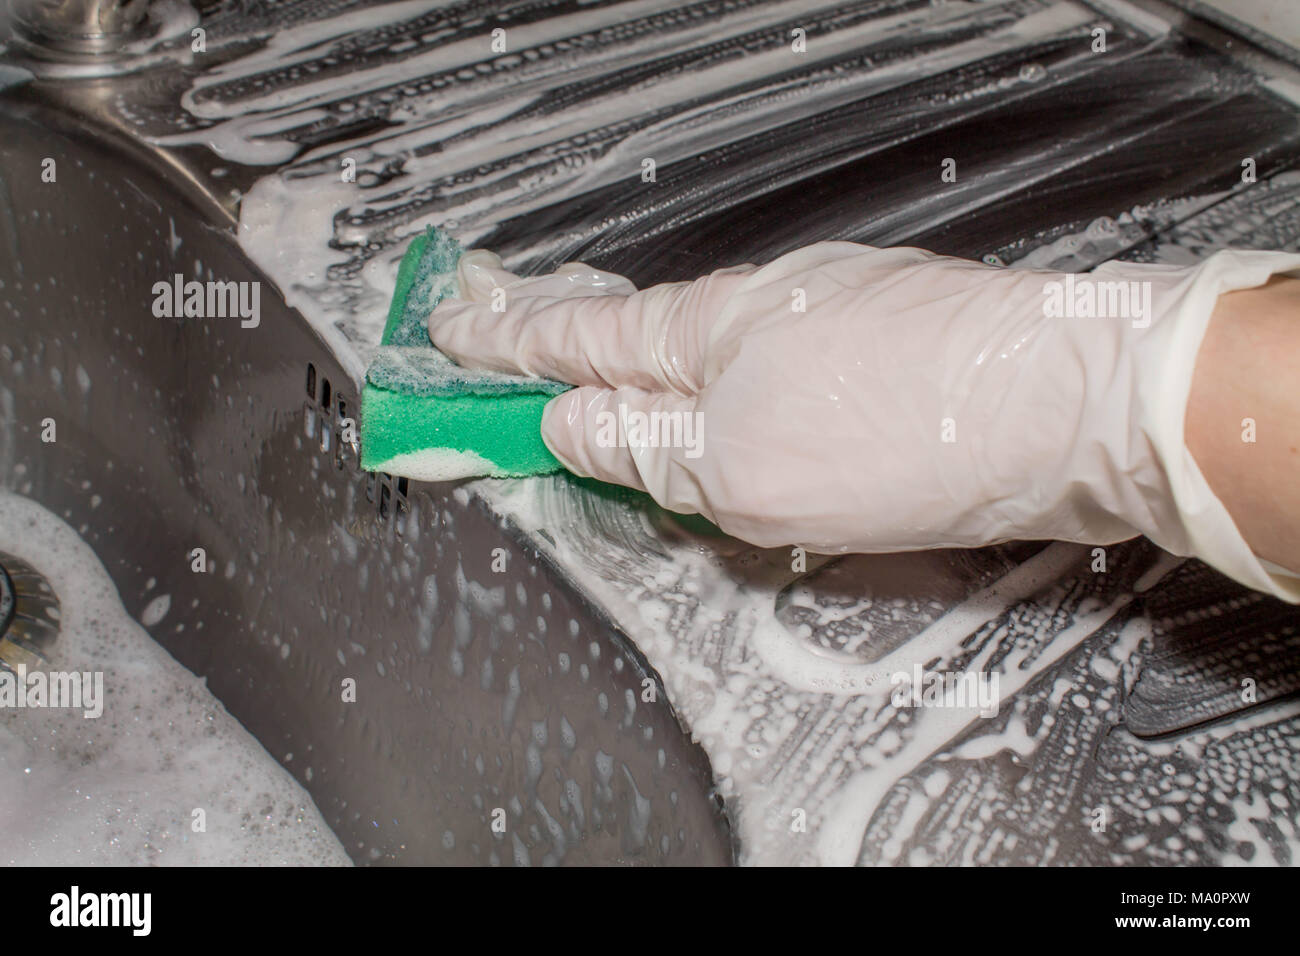 hand in latex glove duster washing the metal sink. cleaning Stock Photo